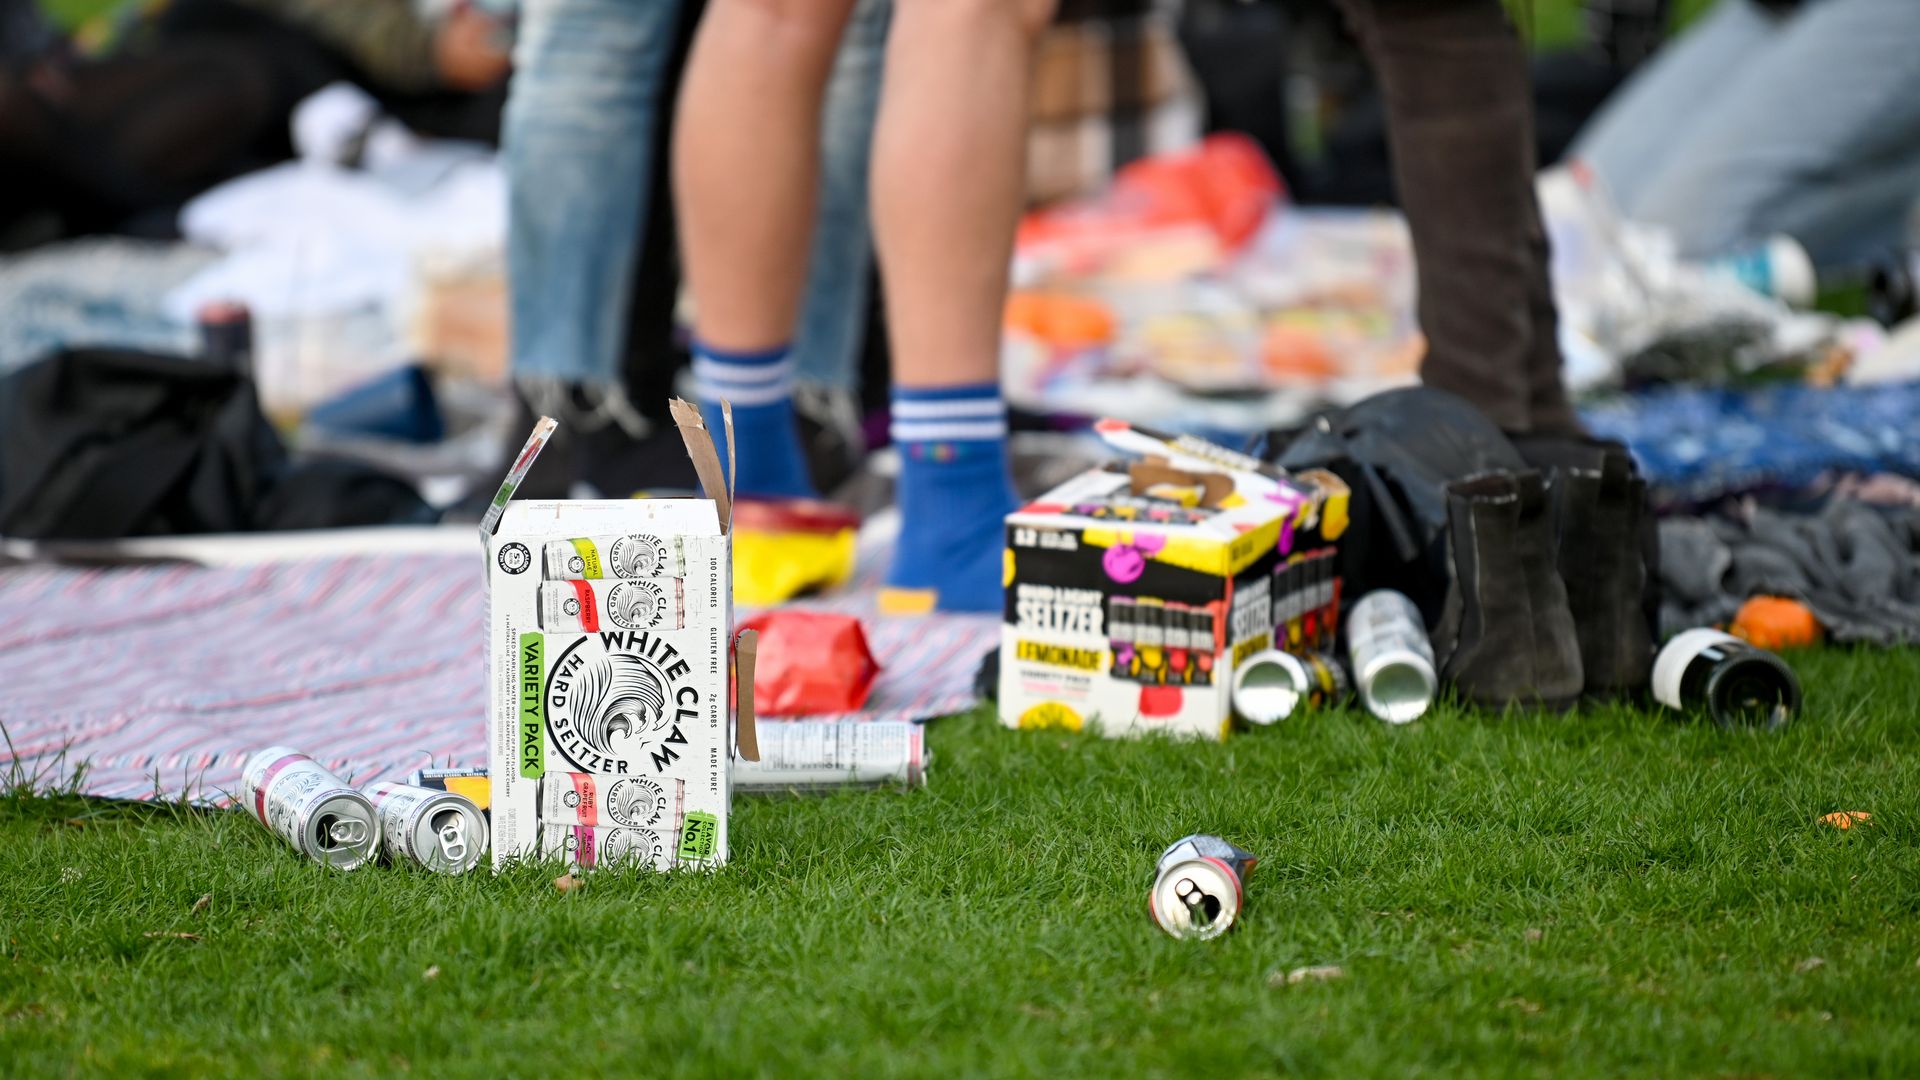 Empty cans of White Claw hard seltzer at an Easter party in New York's Central Park. 